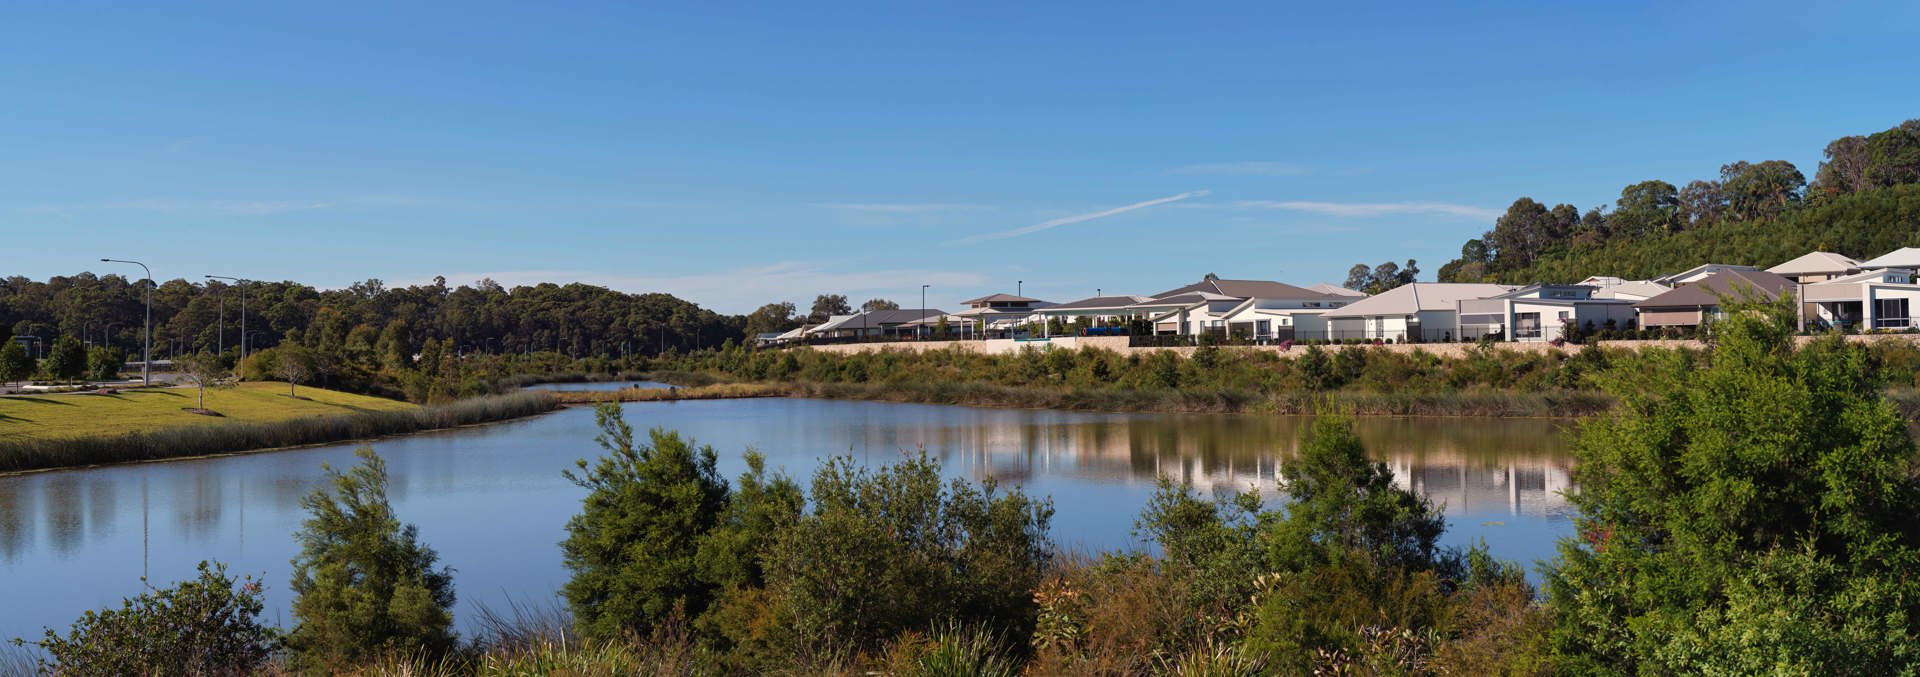 Landscape shot of Halcyon Lakeside lake with homes in the background